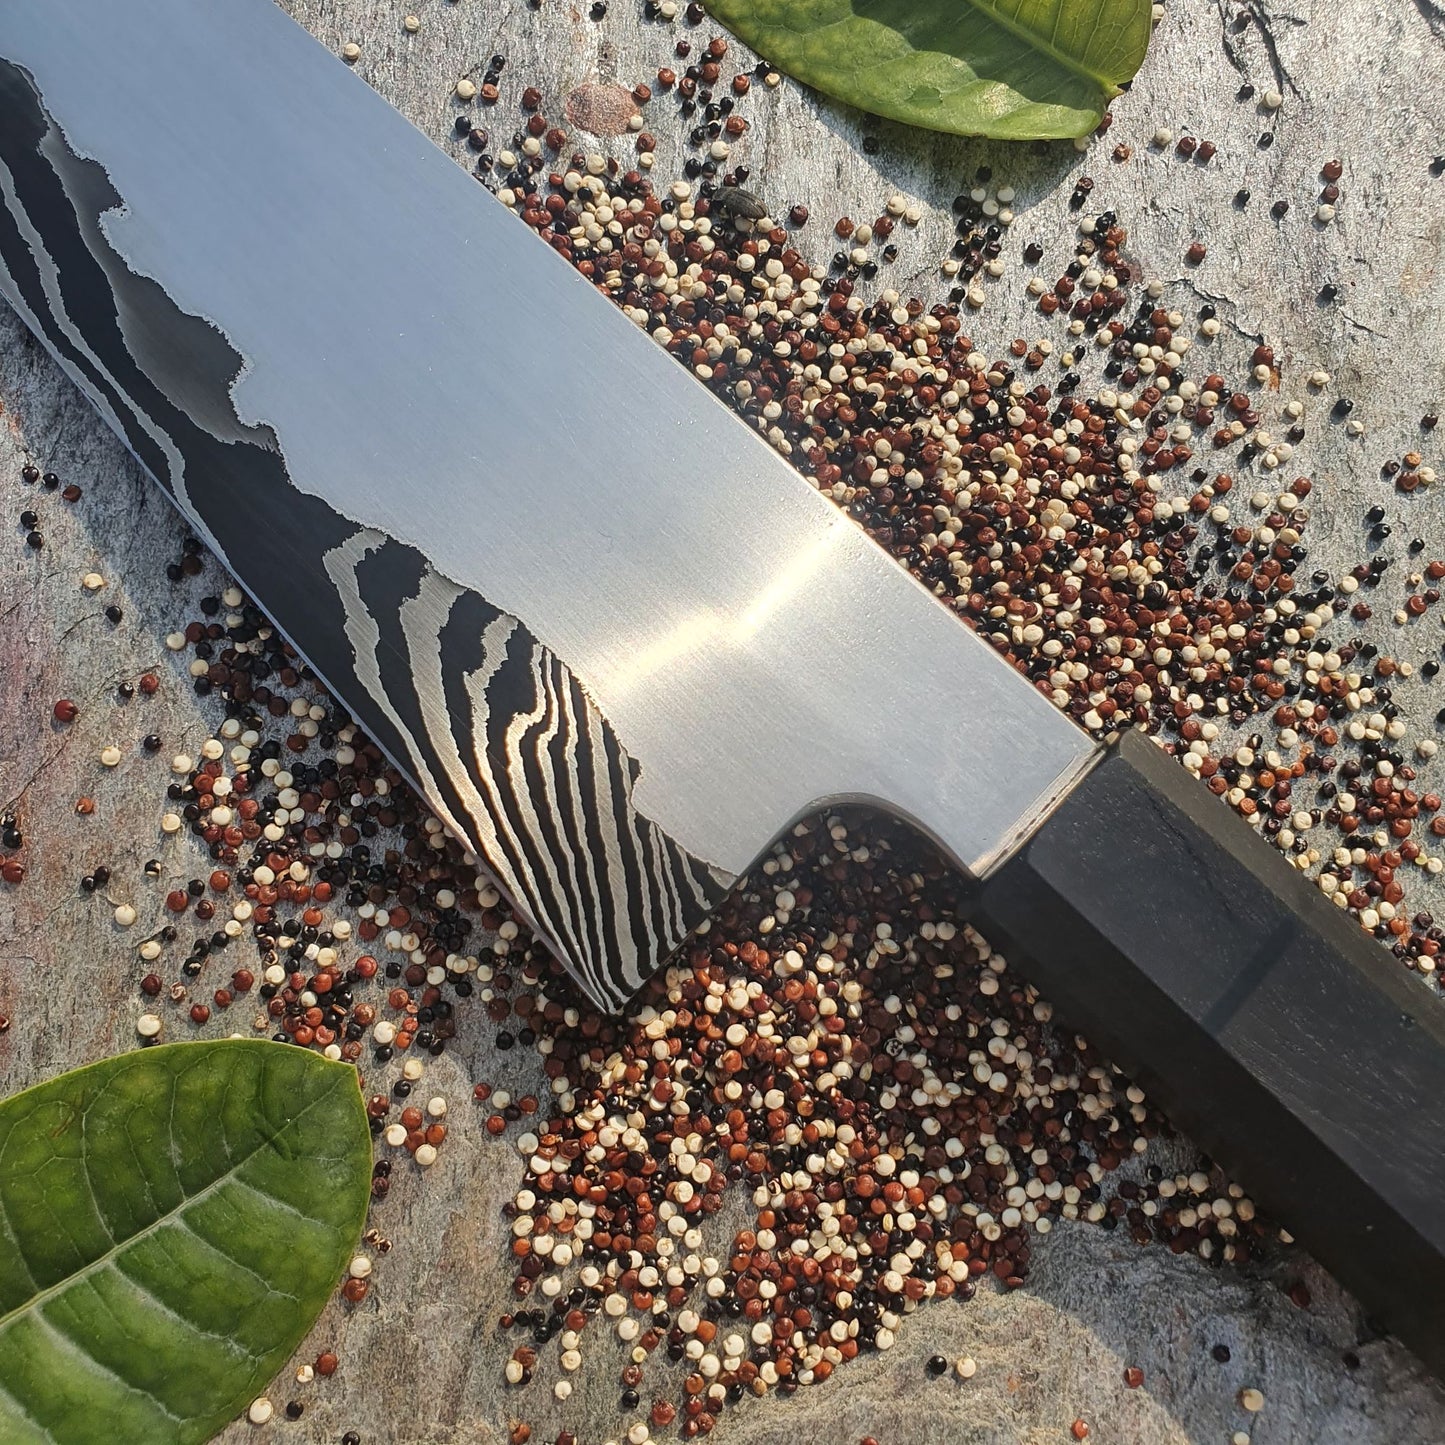 Chef's Knife "Lickin' Flames"